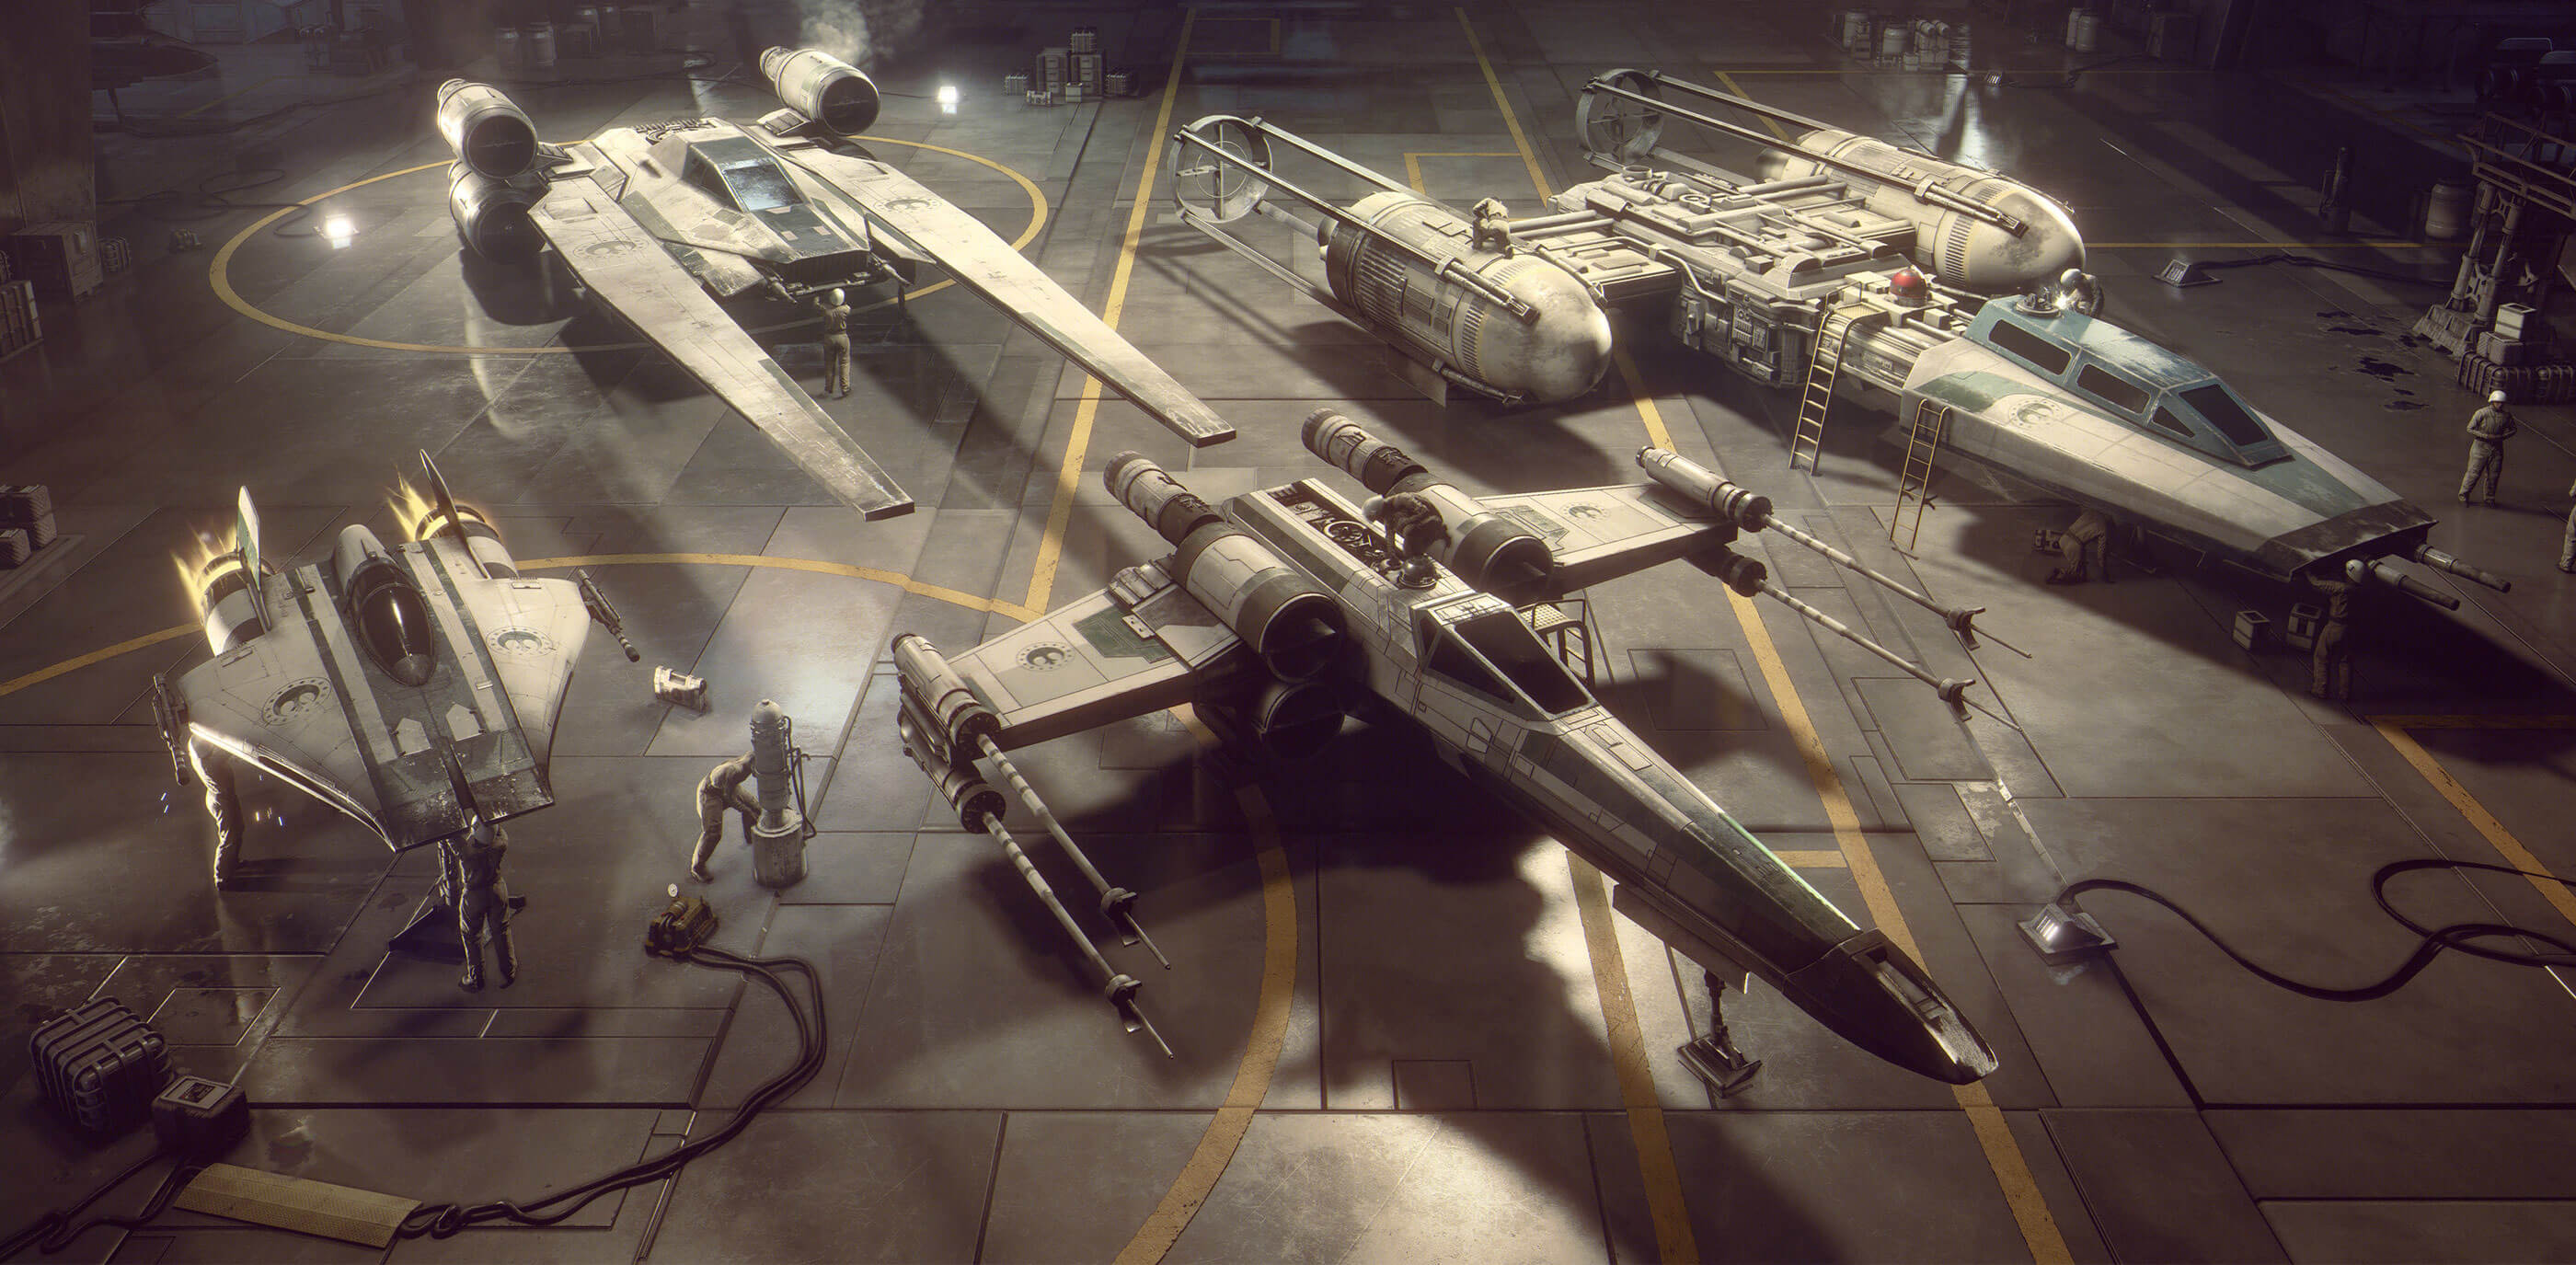 An X-Wing fighter and other Rebel Alliance ships sit in a hangar